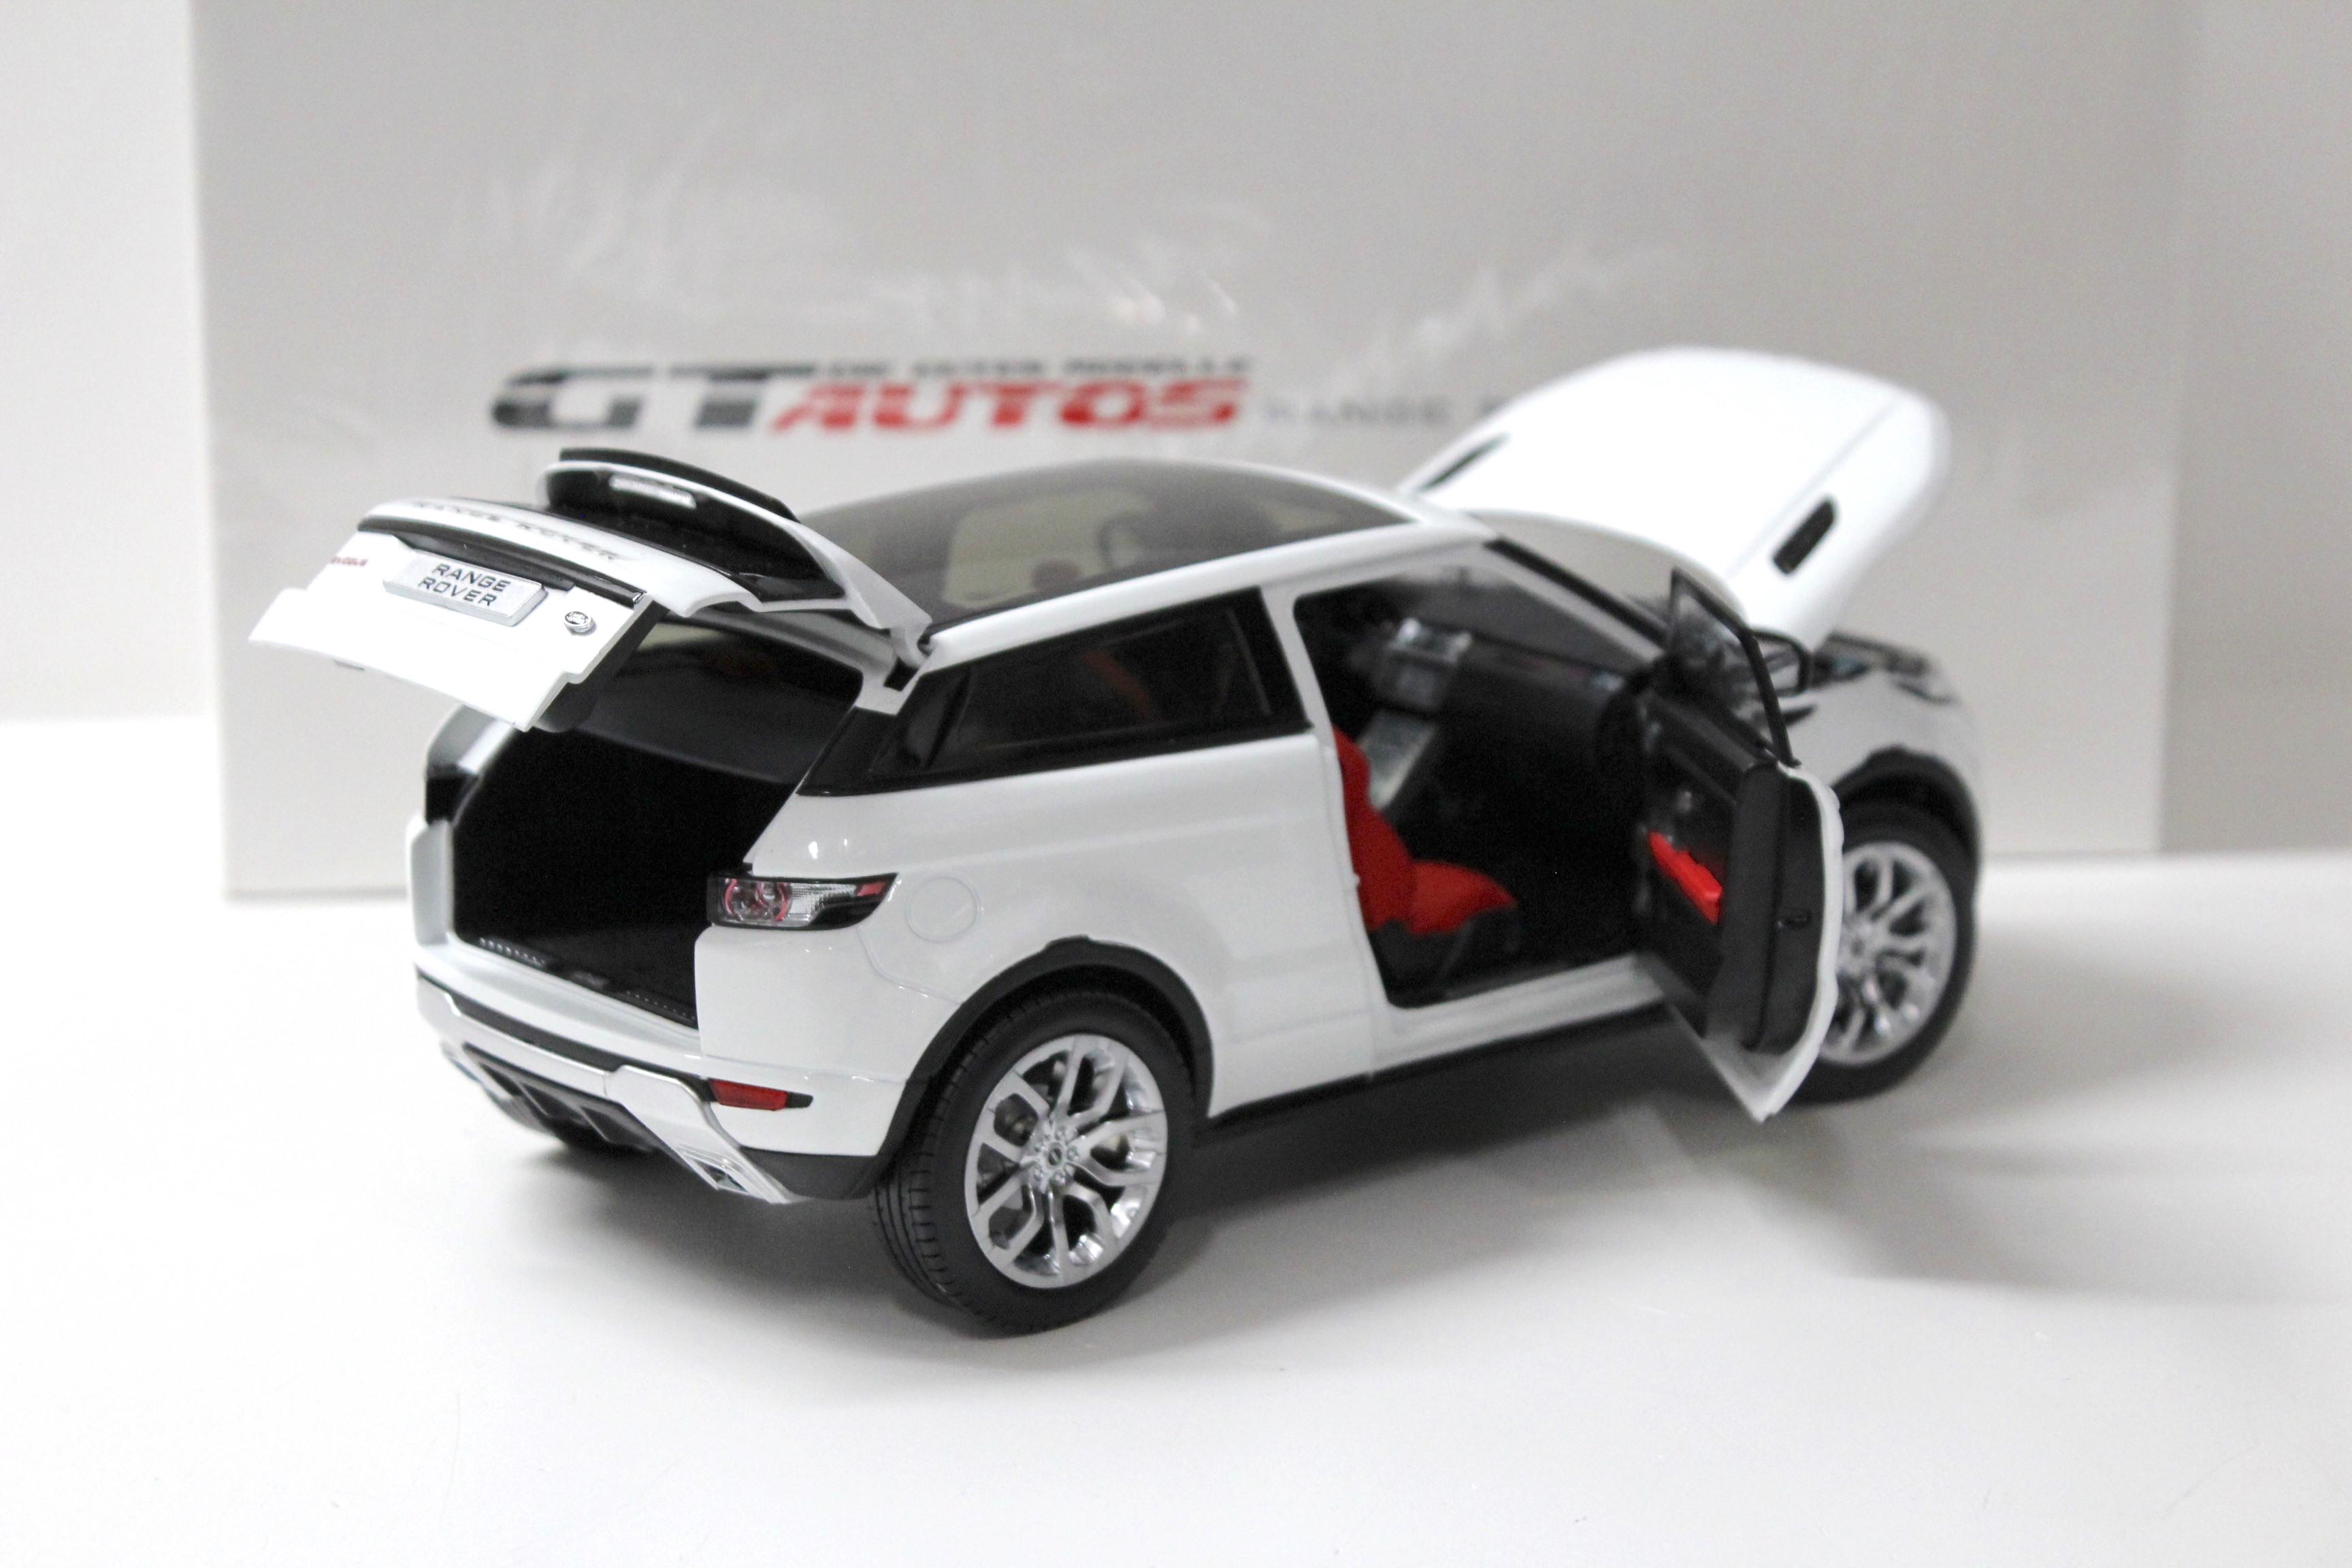 1:18 Welly GTA Range Rover Evoque white with Roof 2011 DEALER VERSION